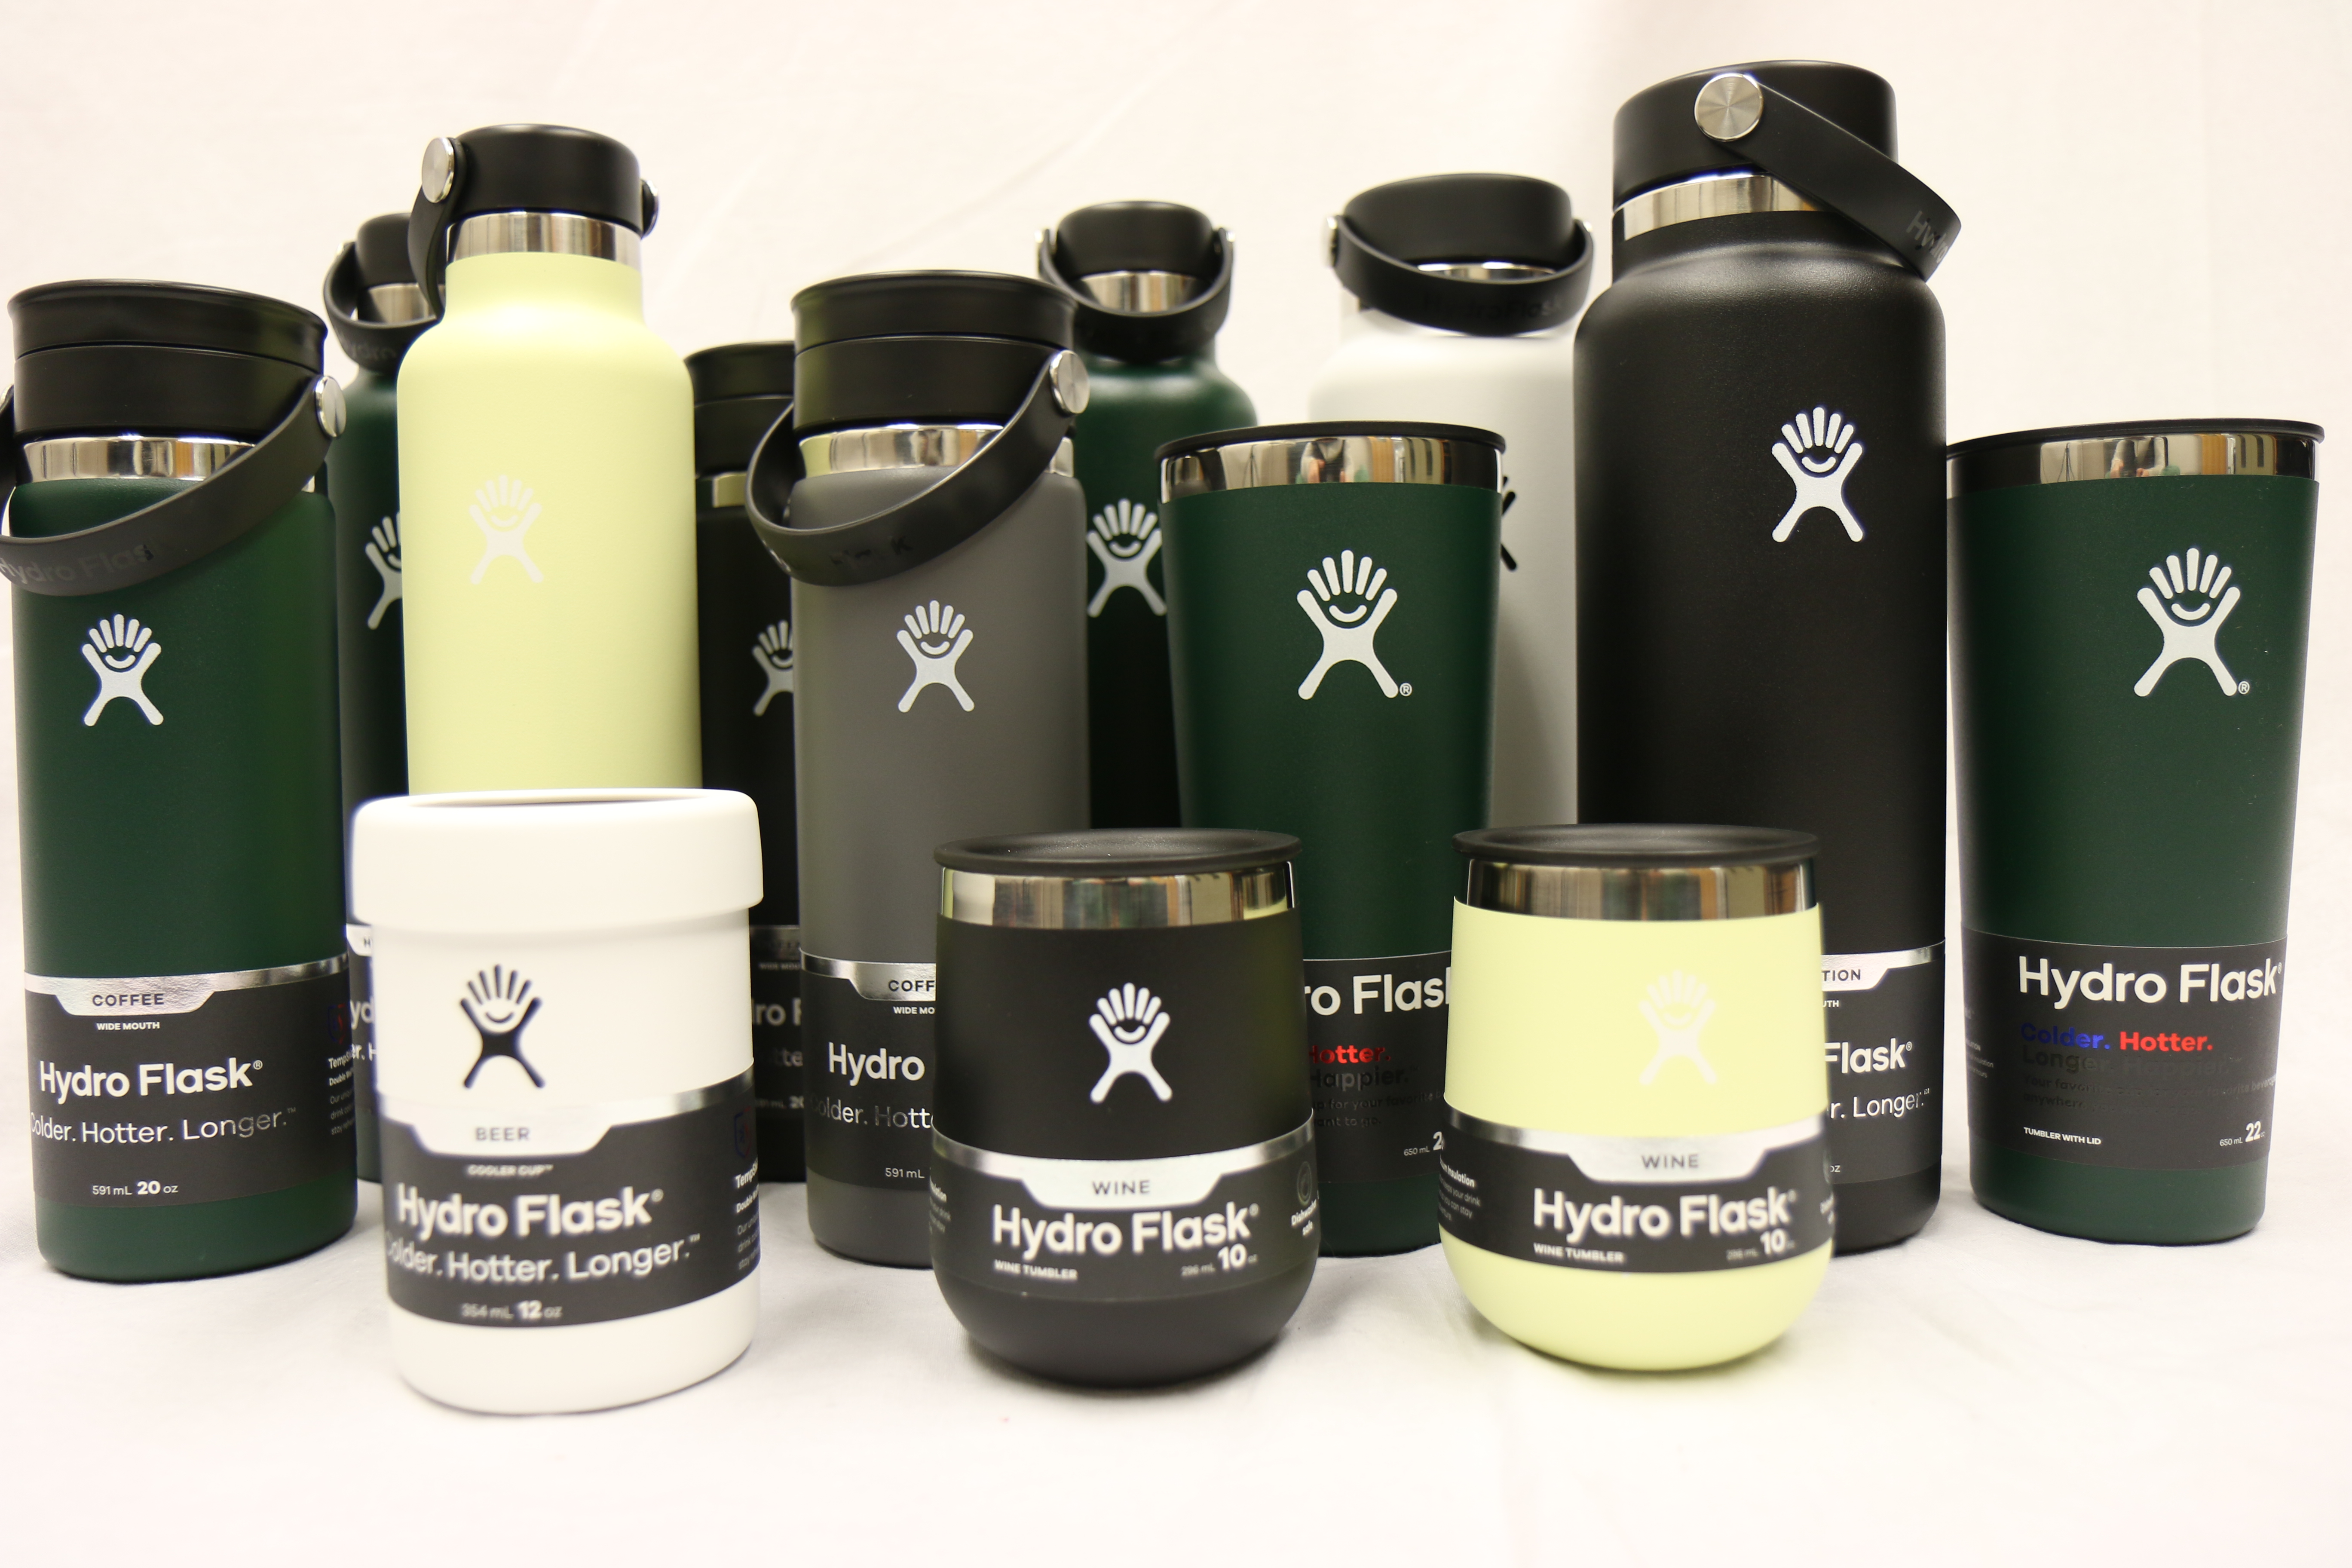 Photo of Hydro Flask bottles and containers